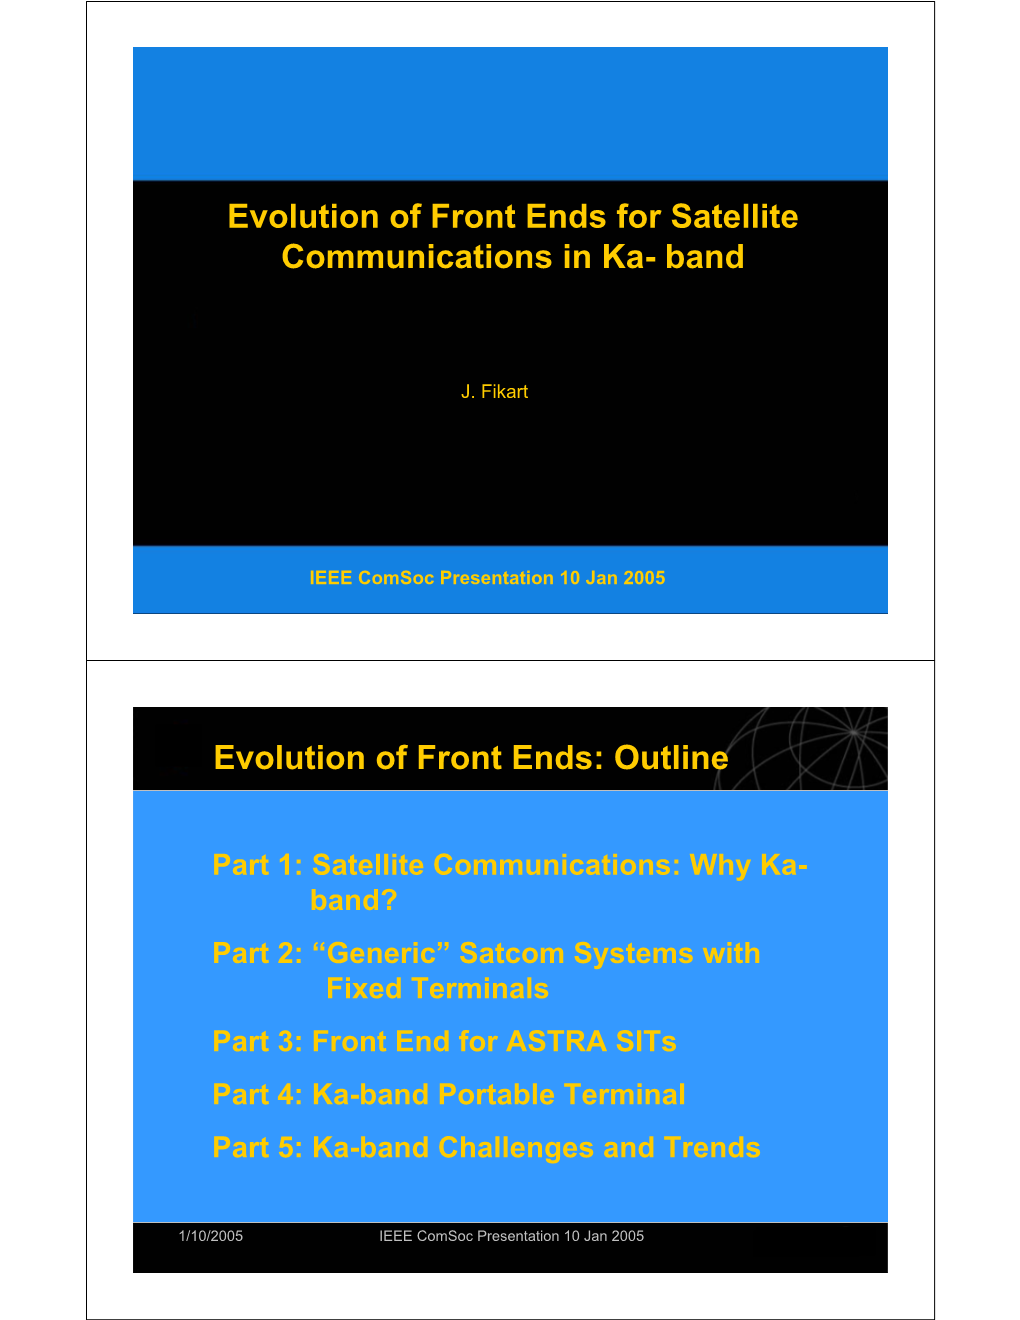 Evolution of Front Ends for Satellite Communications in Ka- Band